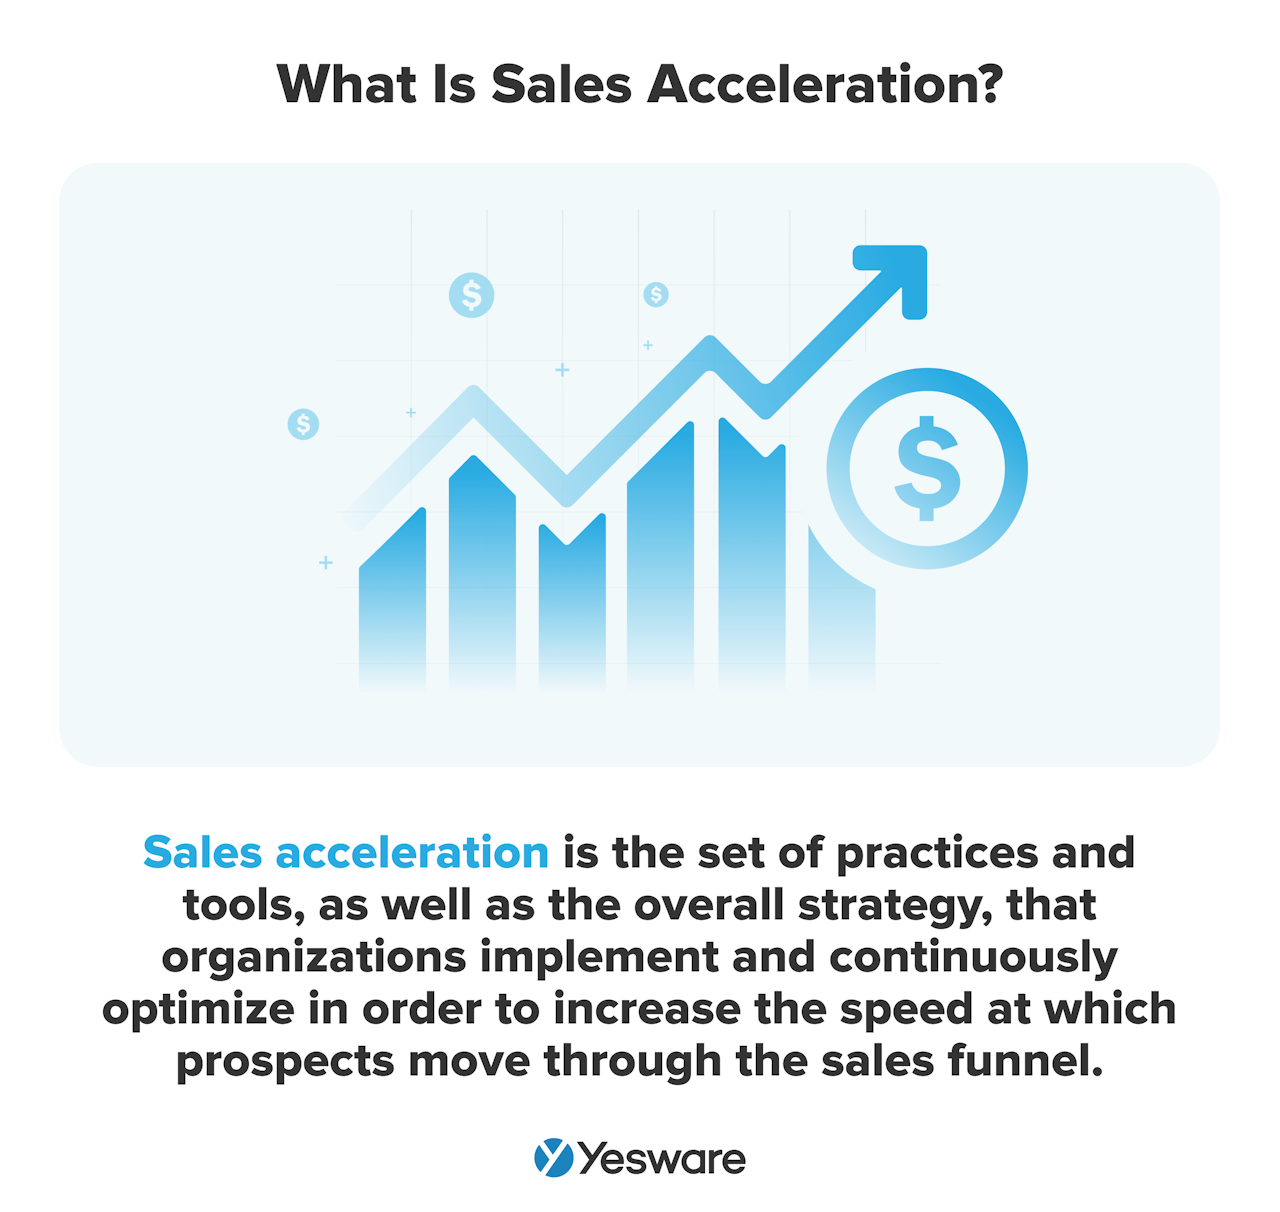 What is sales acceleration?